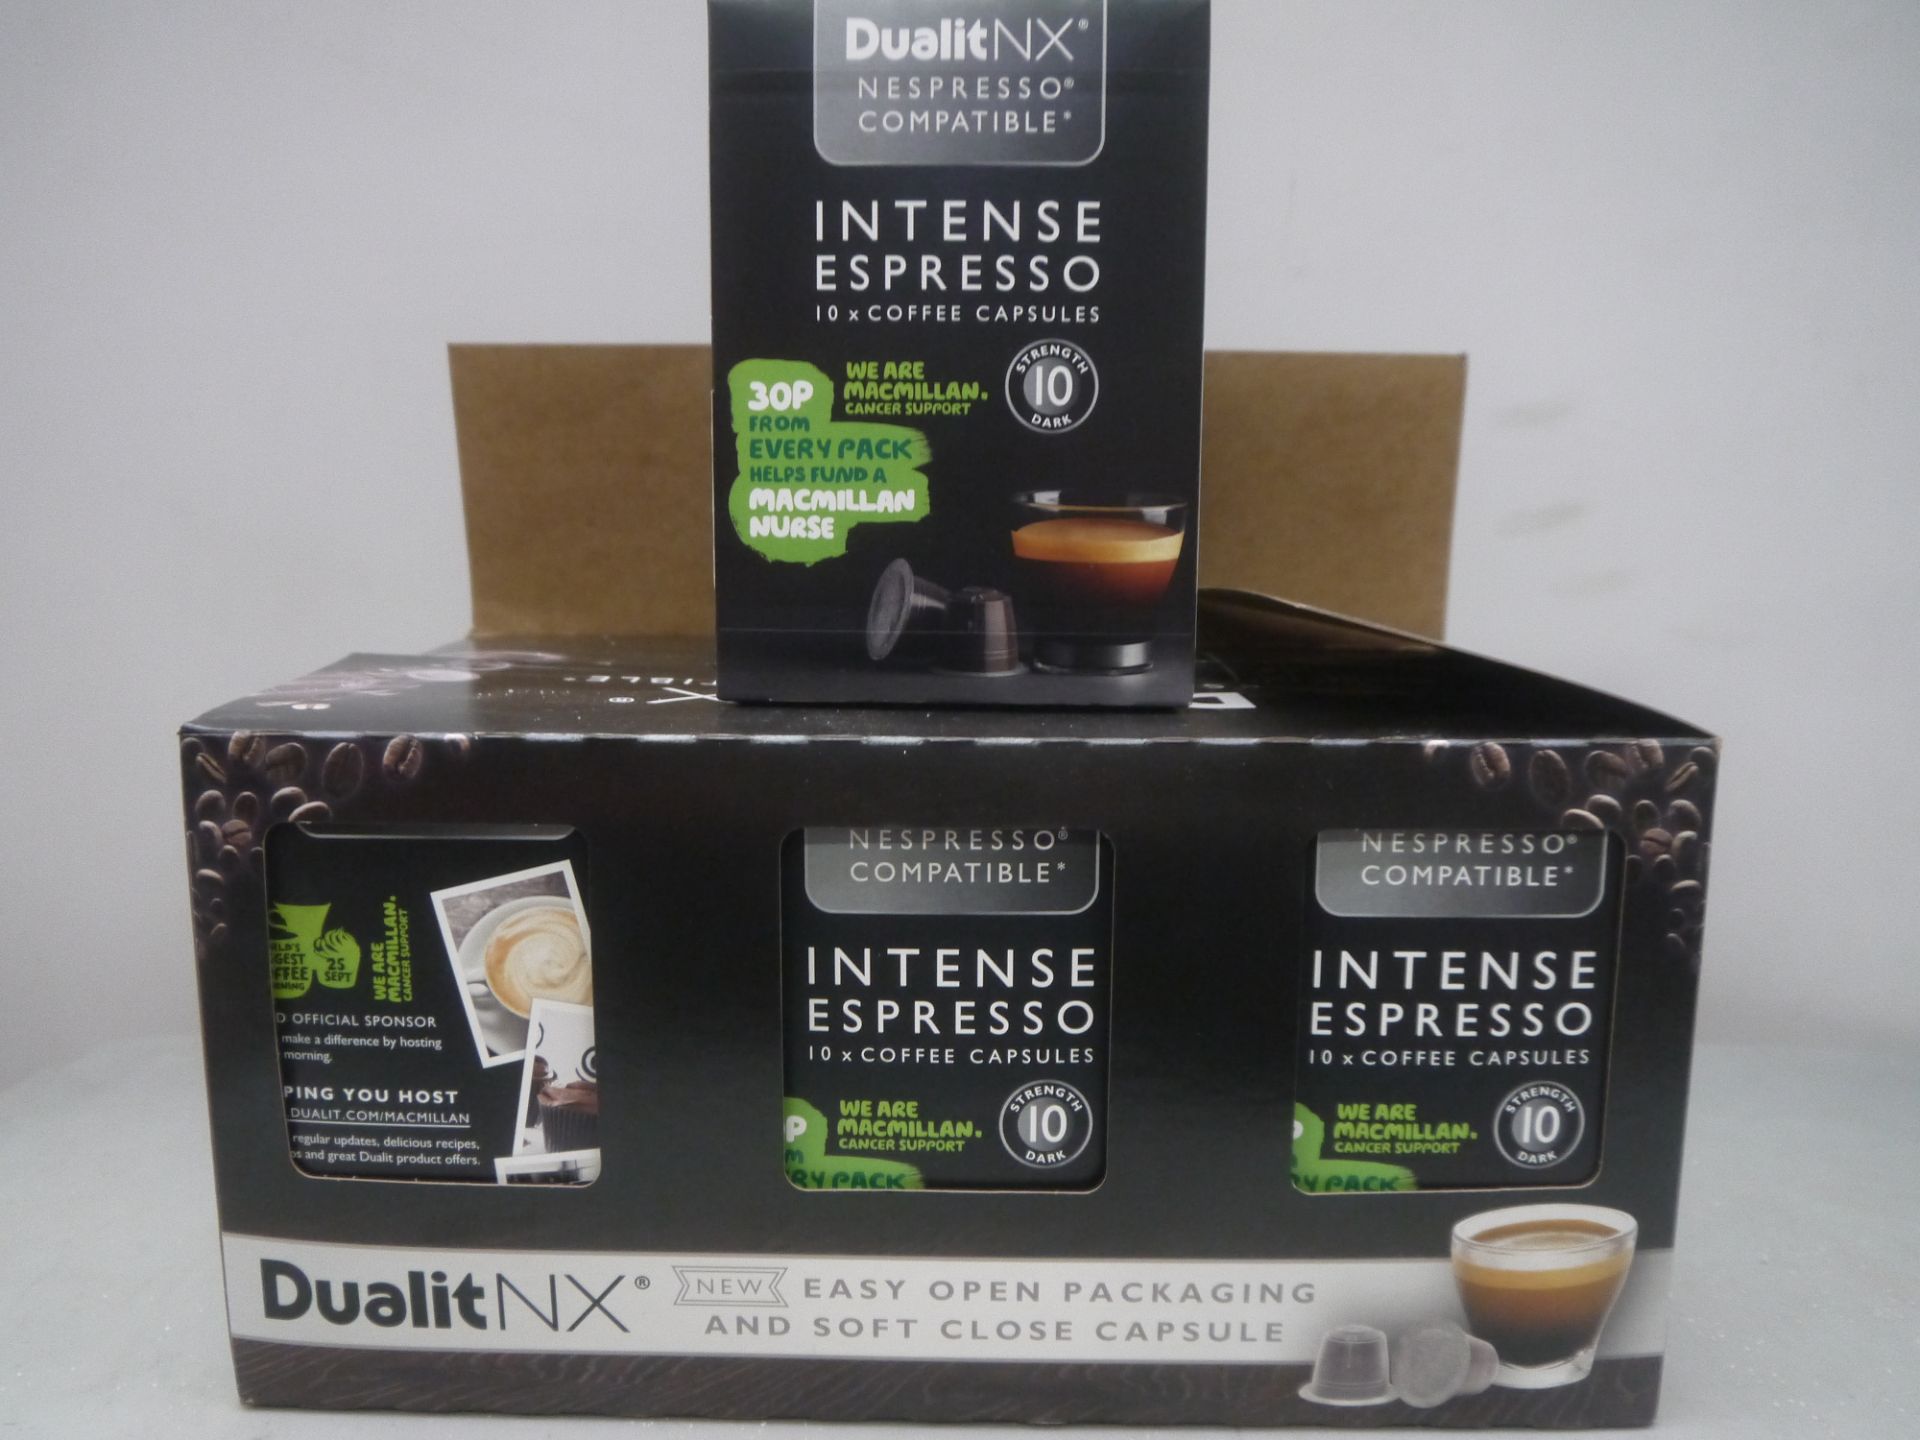 Box of Approx 60 Dualit NX Cafe capsules, compatib